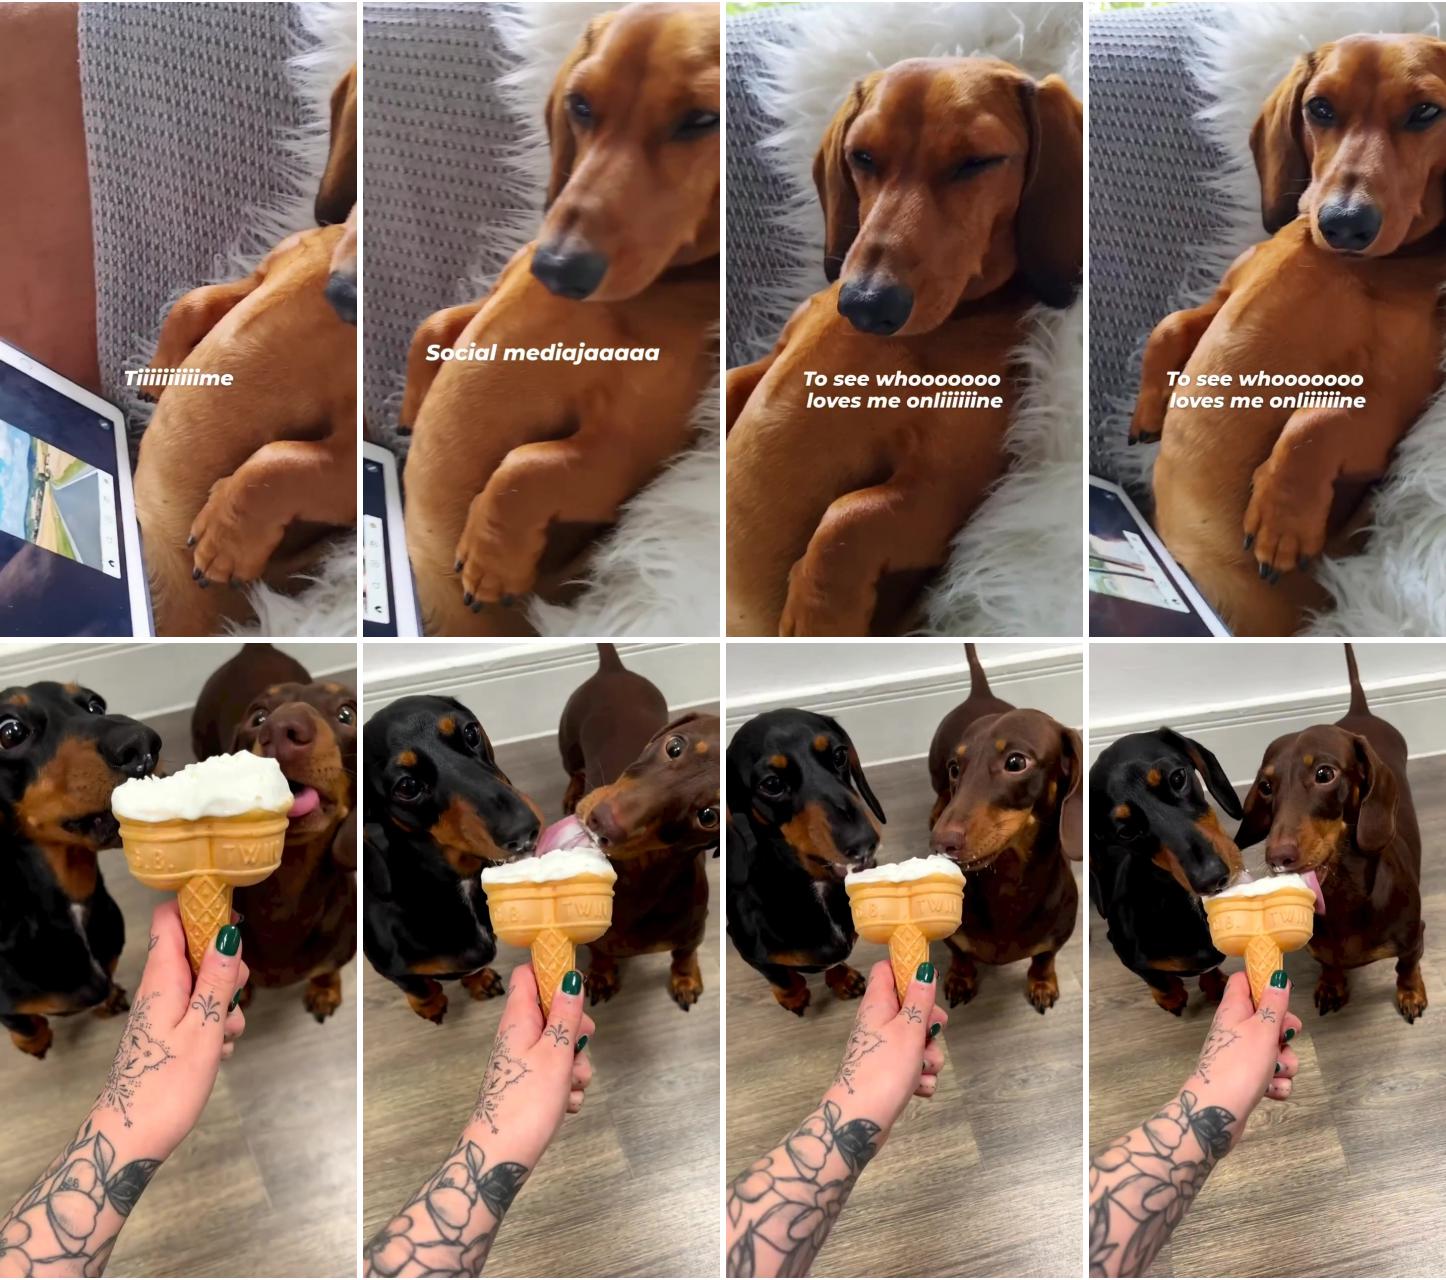 Dachshund dogs; just a couple of sweet treats